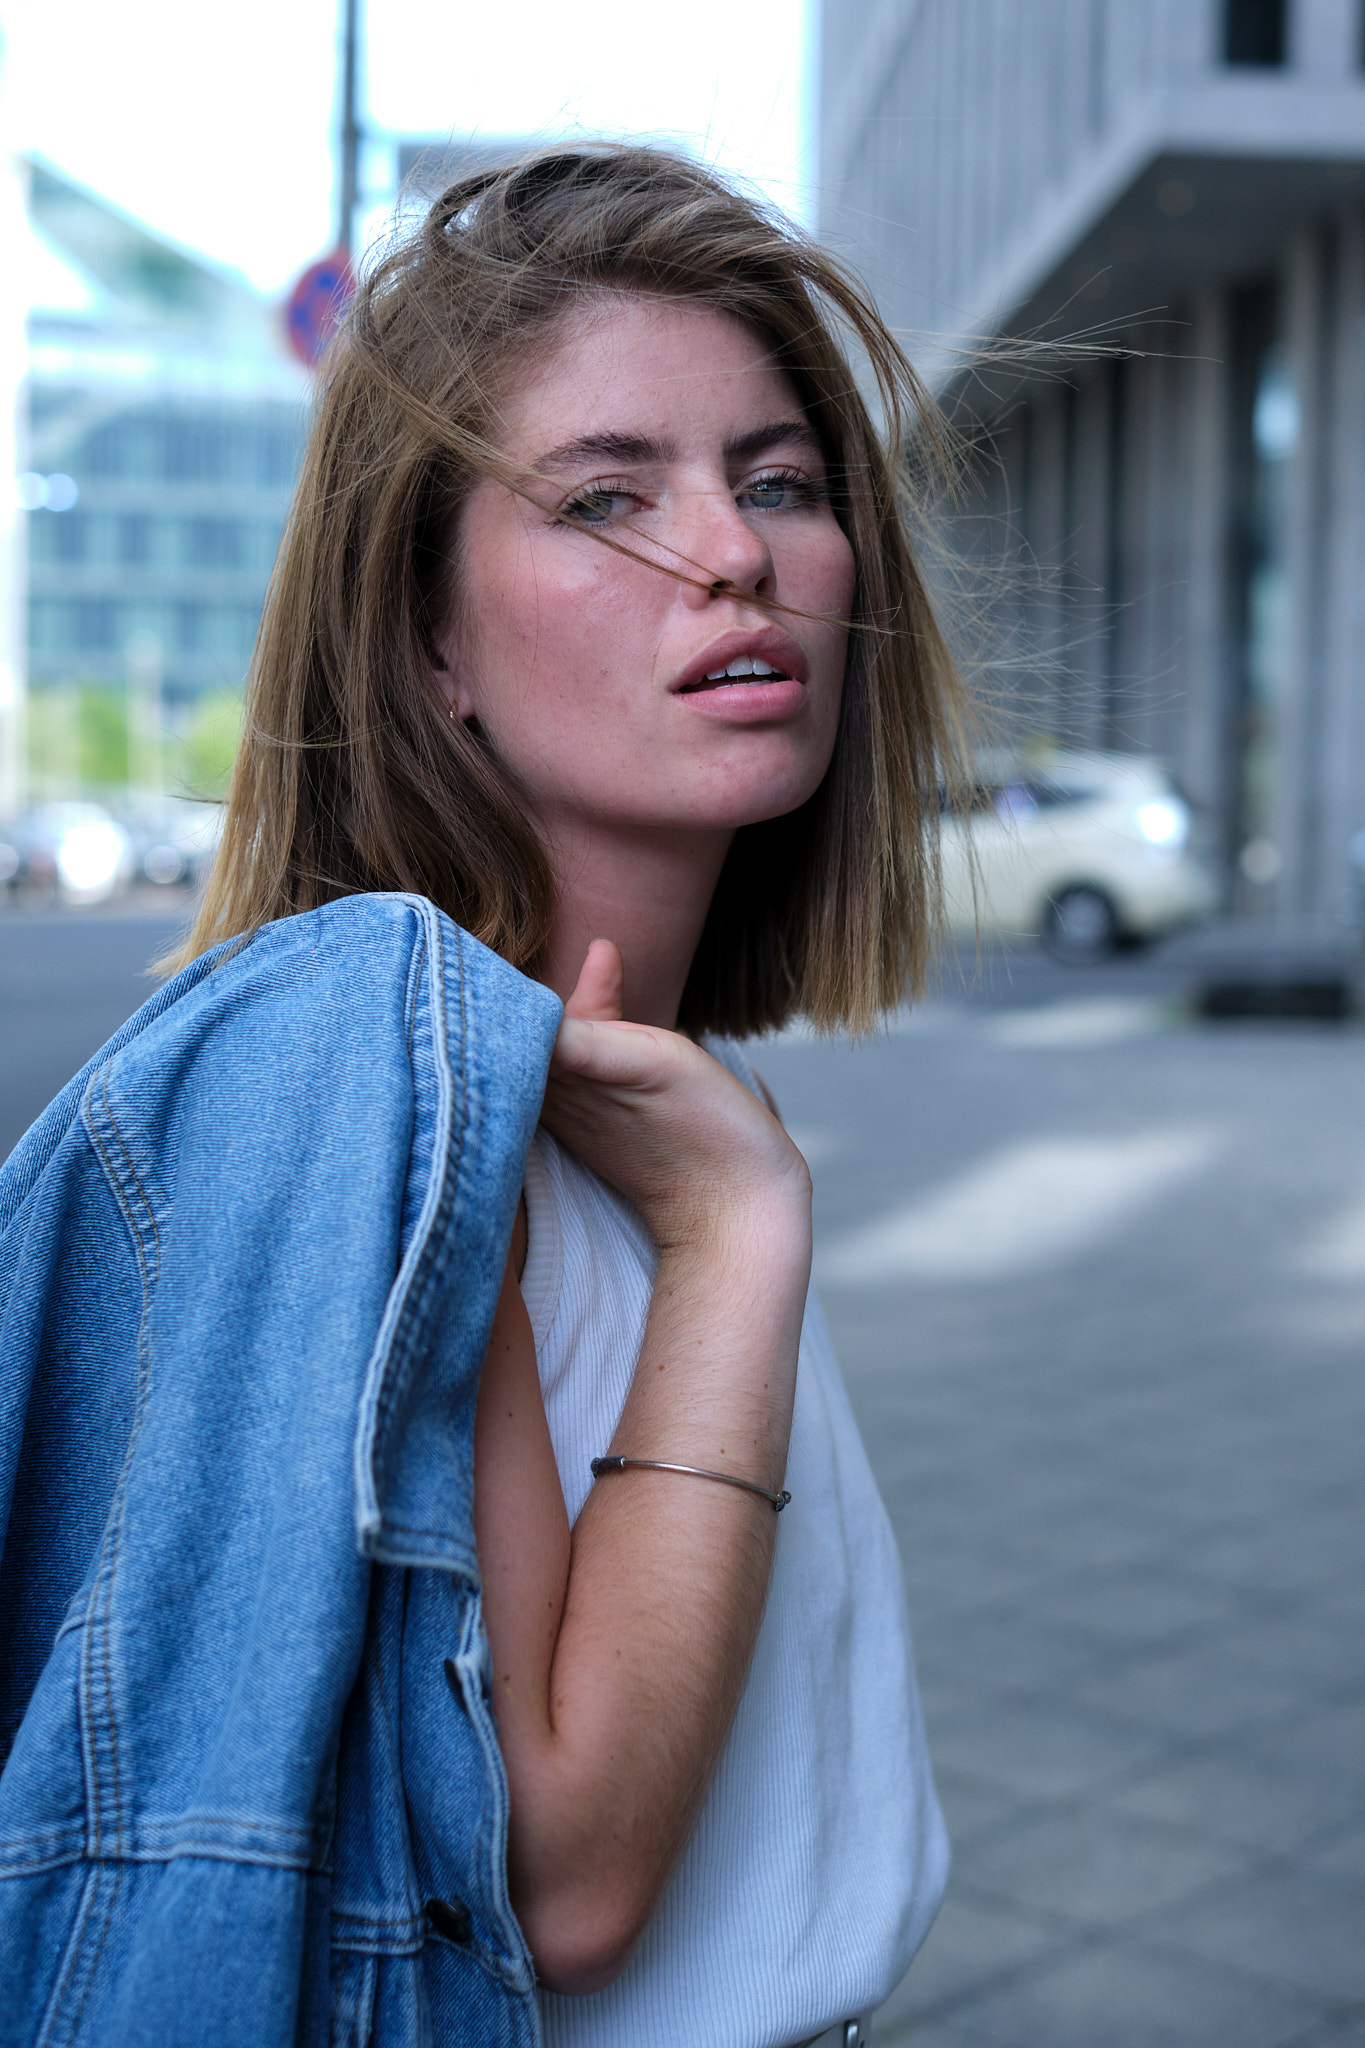 portrait of a young woman walking through the city streets holding a denim jacket over her shoulder